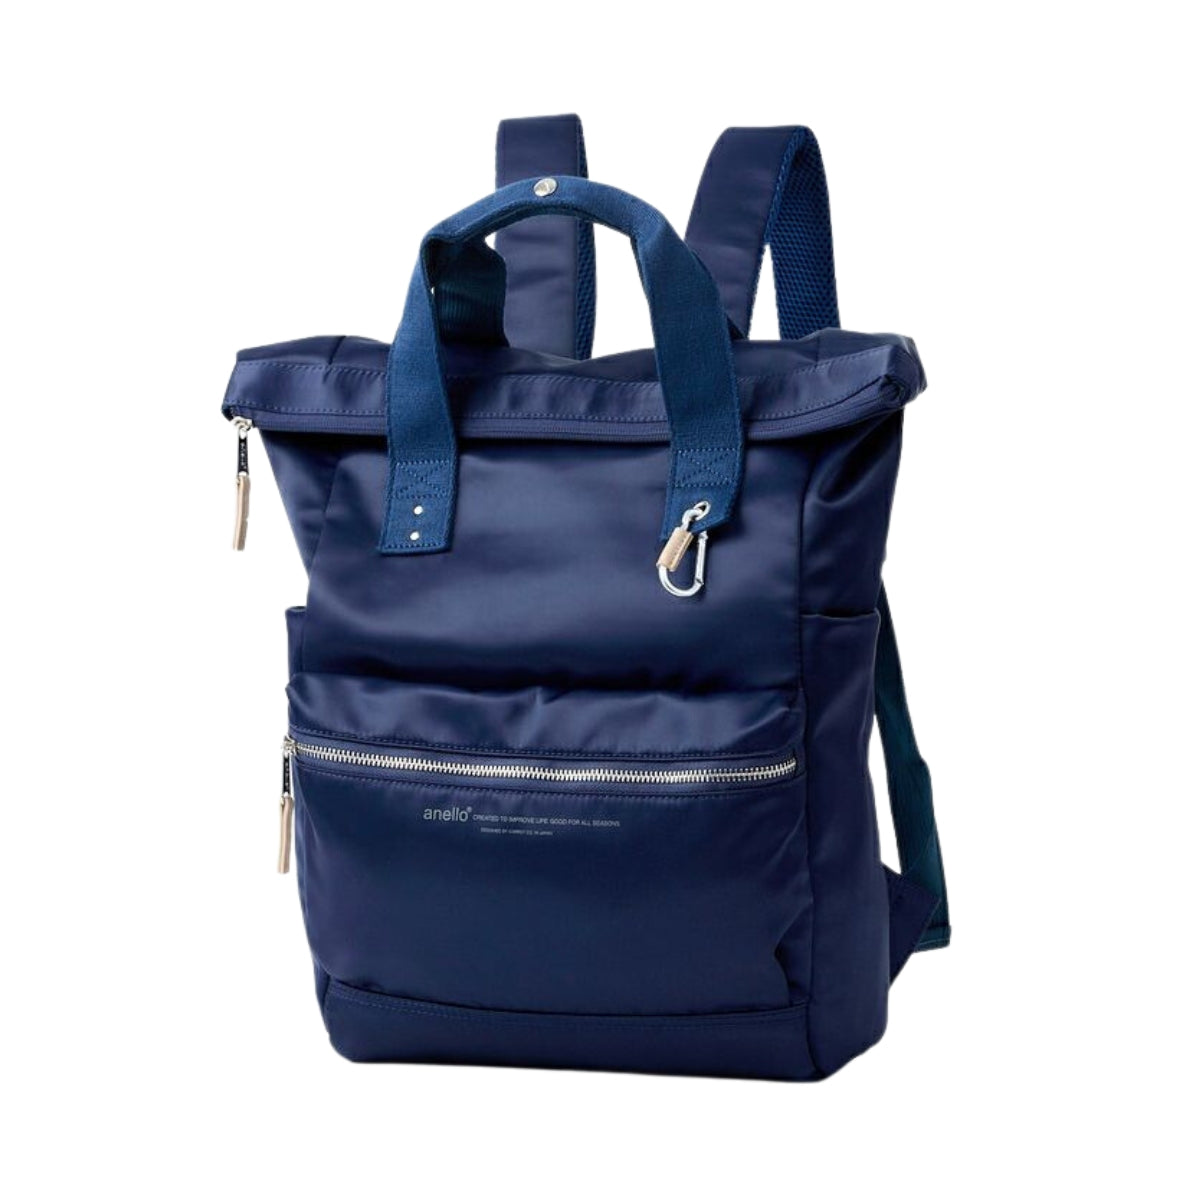 Anello Eleanor Foldpack in Navy